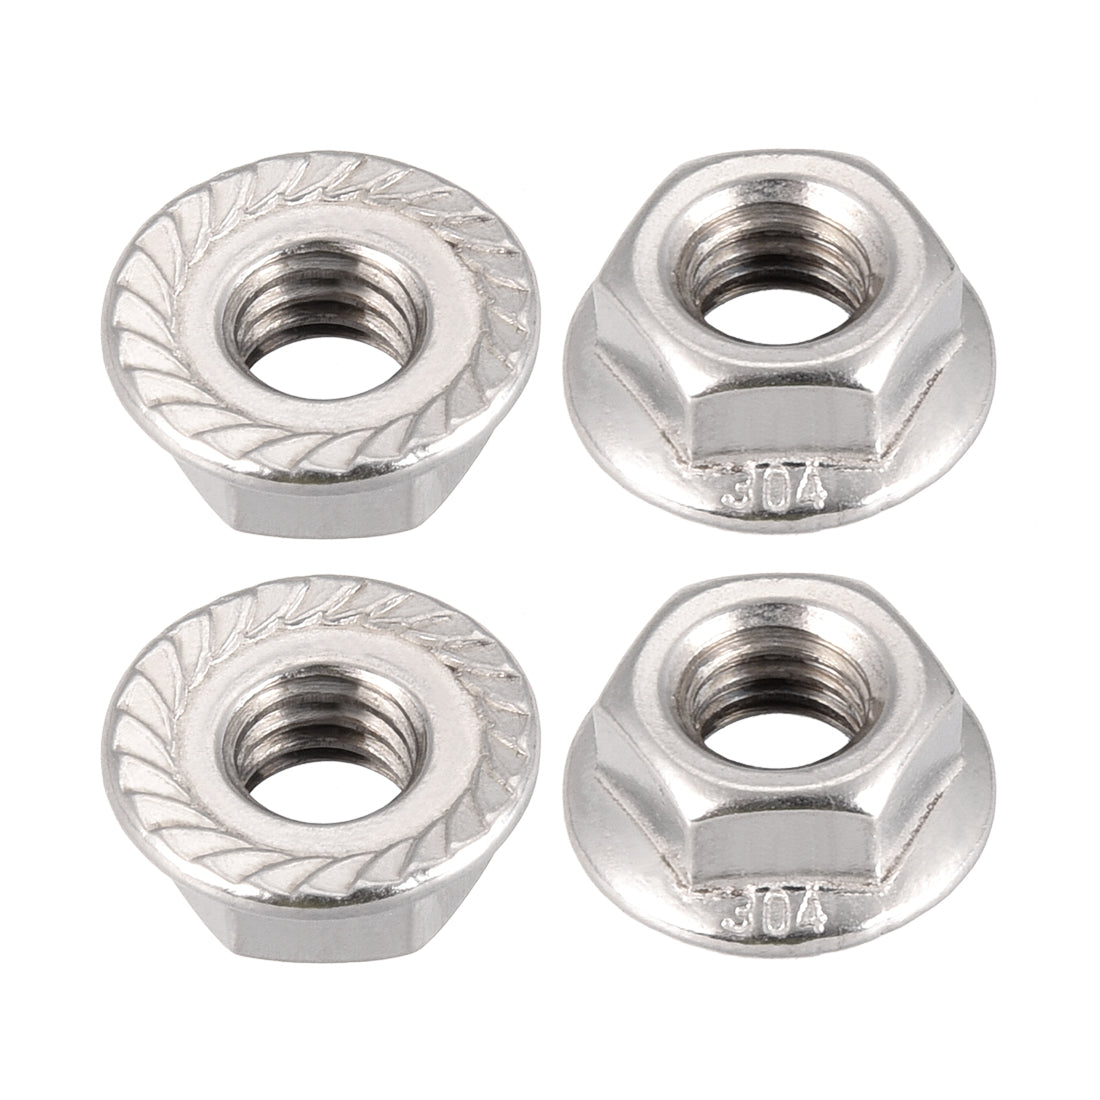 uxcell Uxcell 5/16-18 Serrated Flange Hex Lock Nuts, 304 Stainless Steel, 4 Pcs